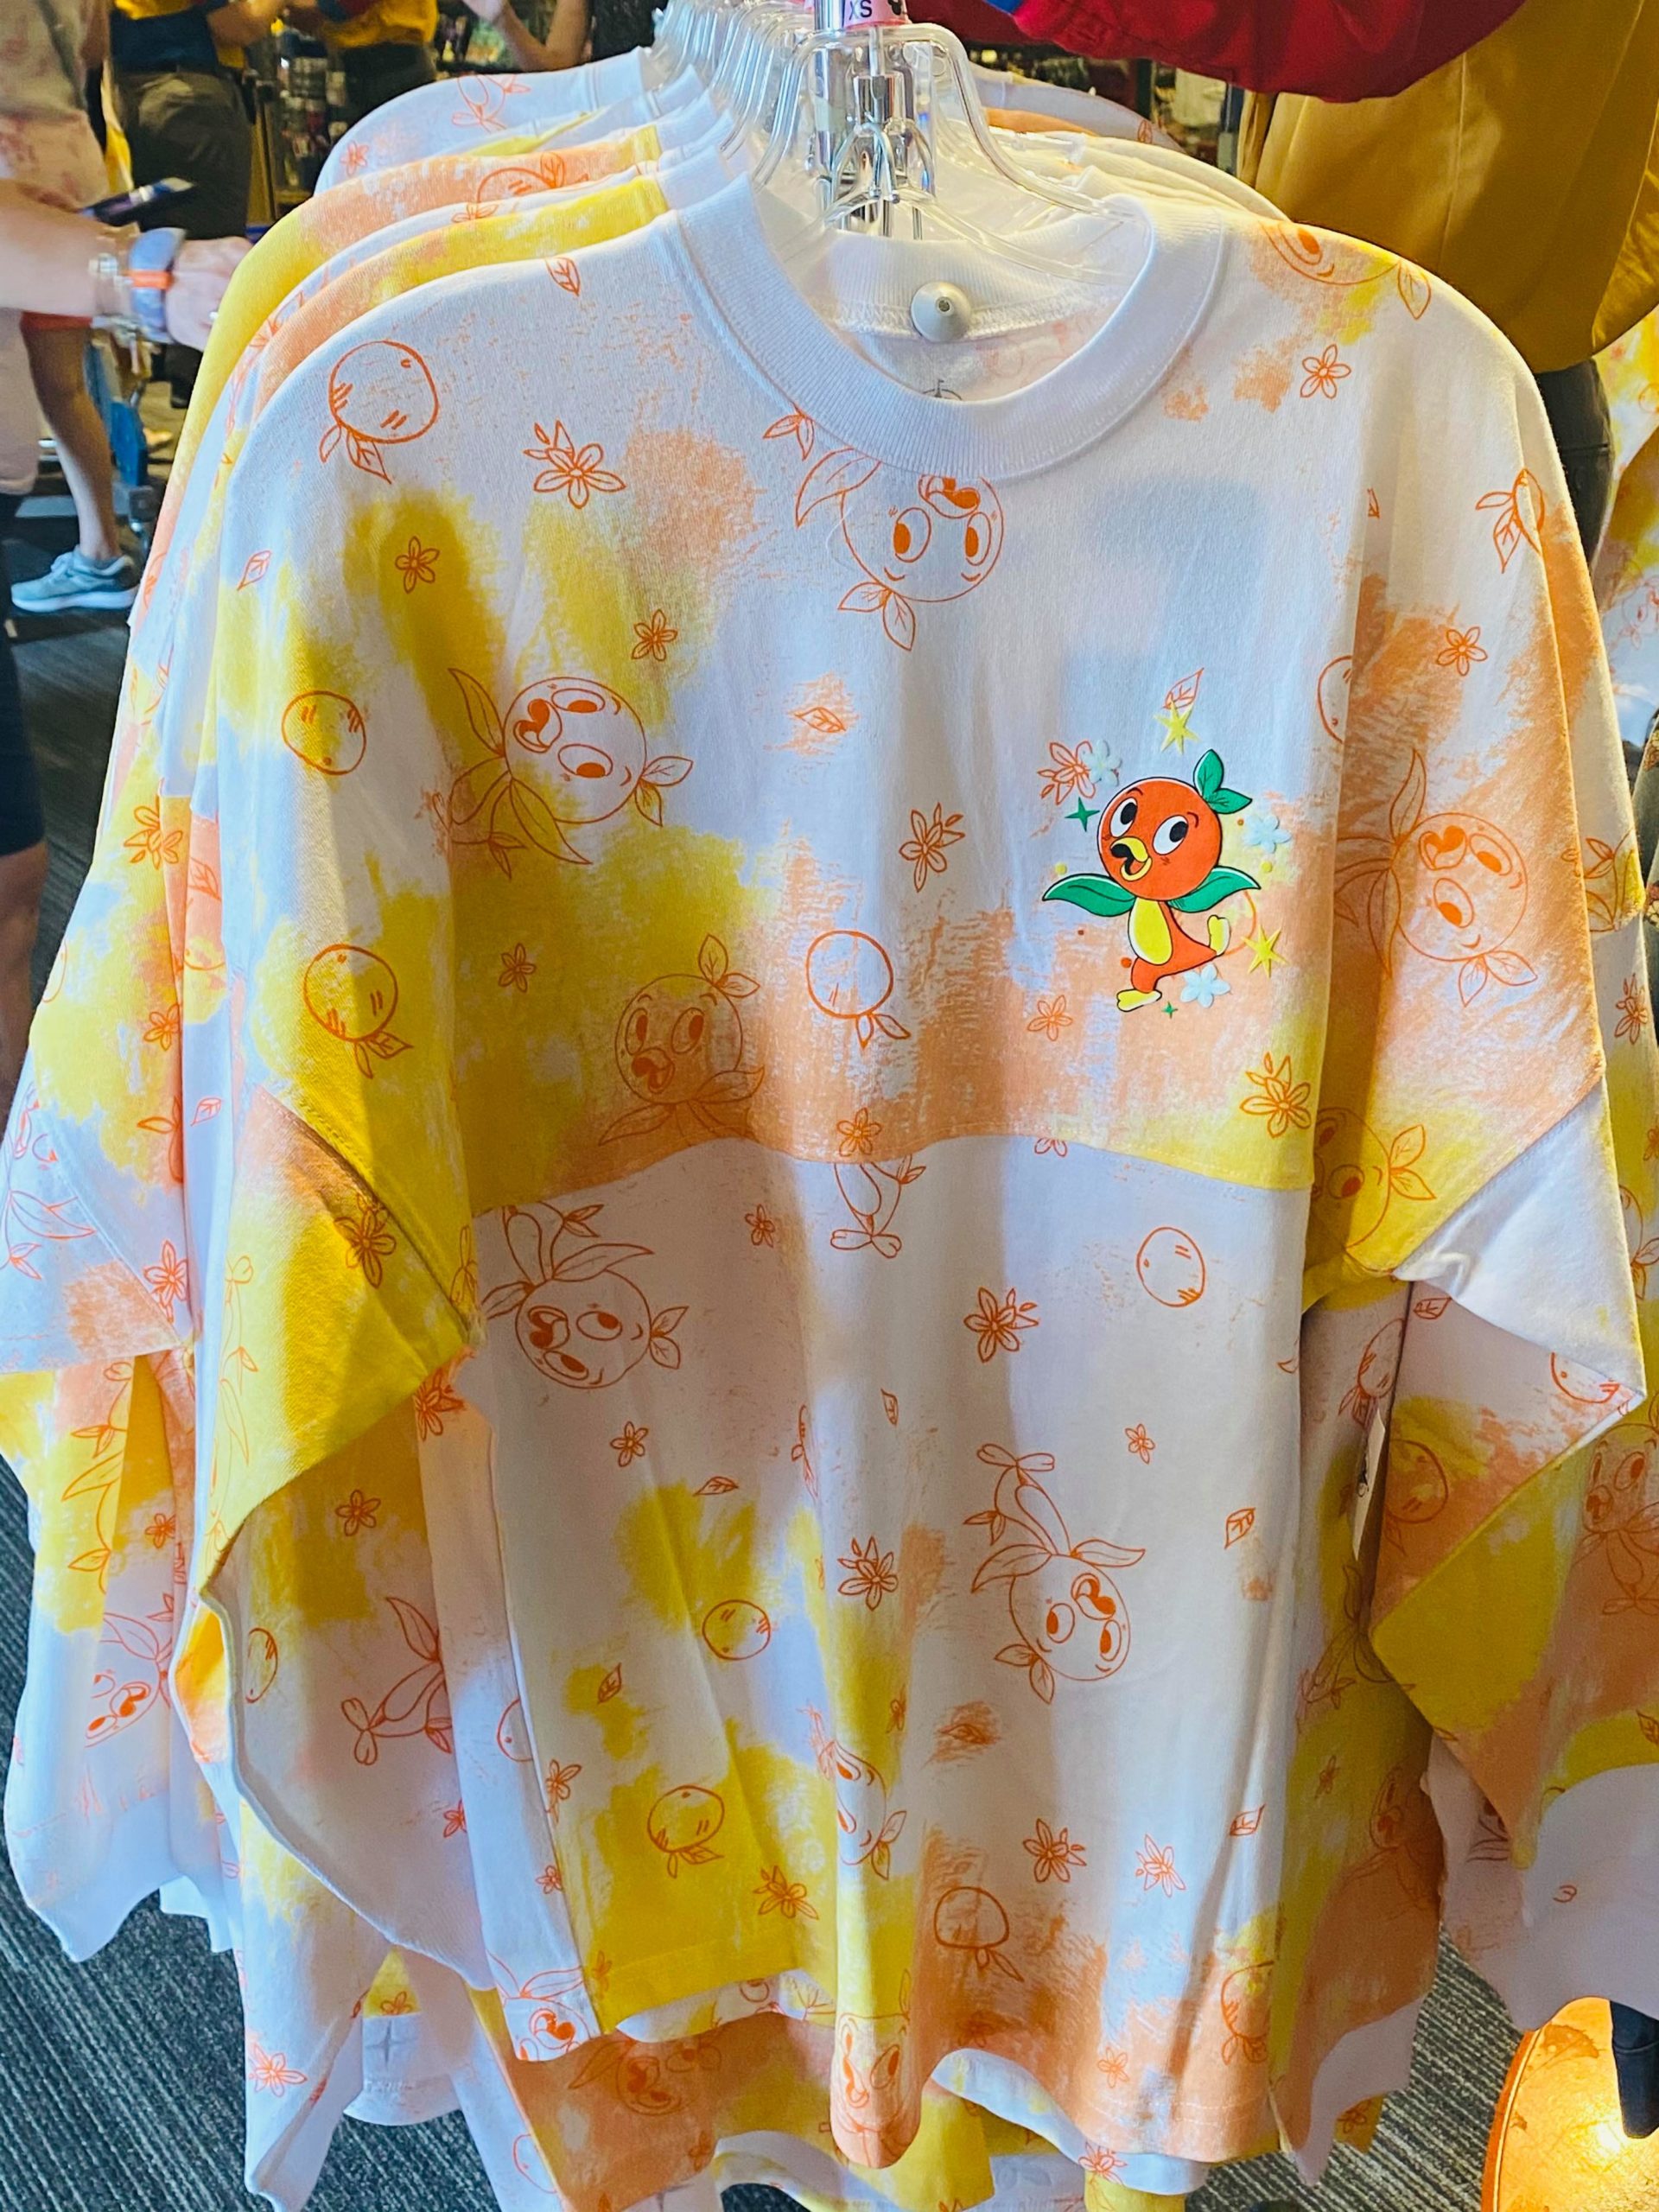 Check Out All of the Awesome Orange Bird Merch at Flower & Garden ...